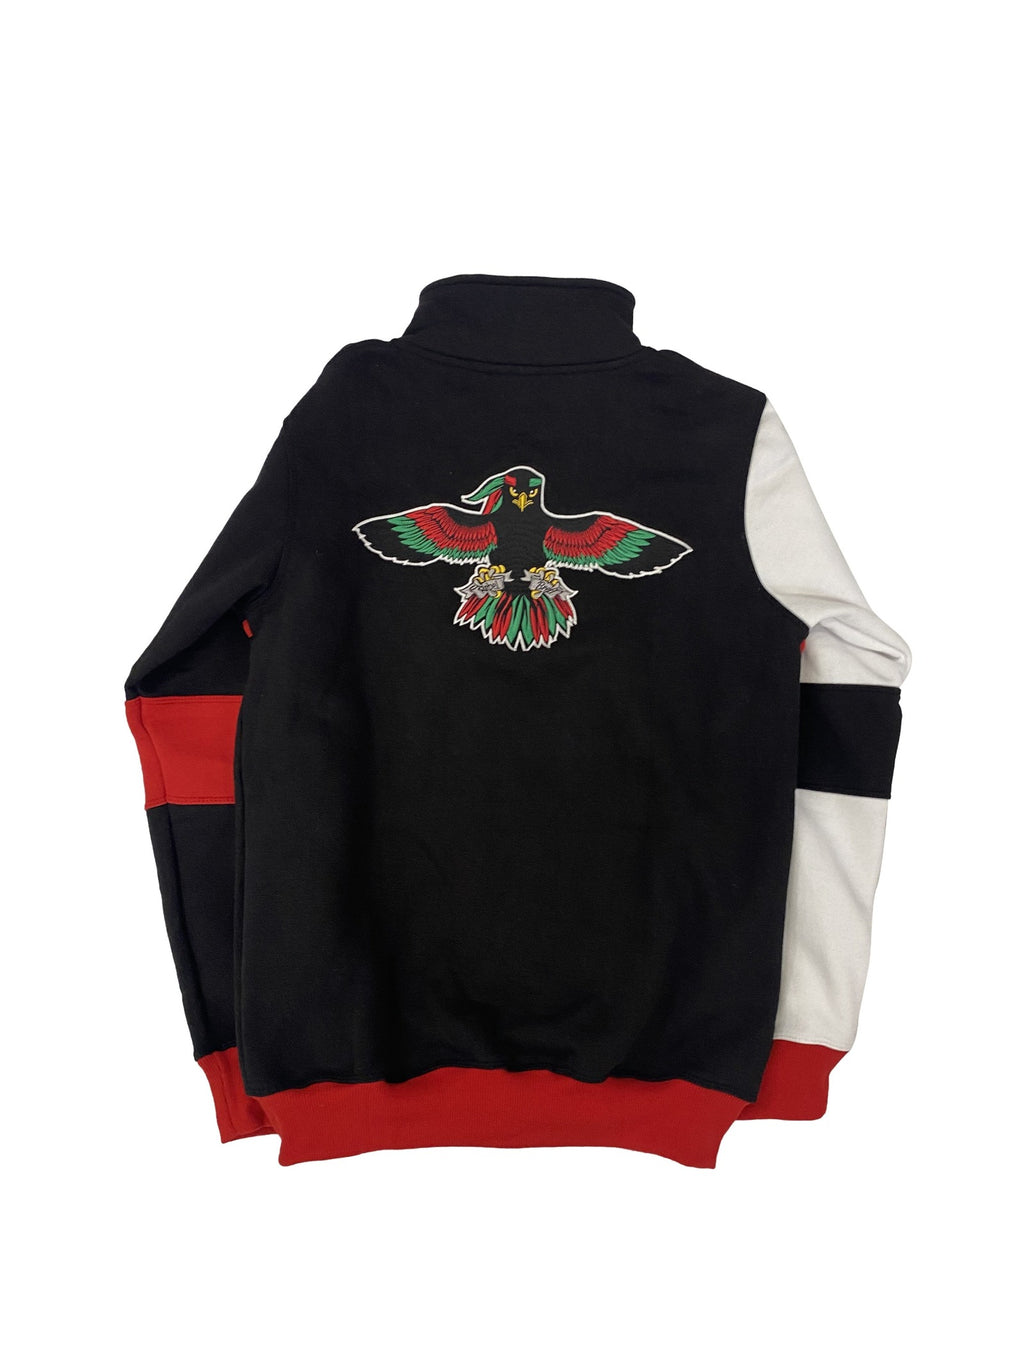 Athletic track jacket with embroidery